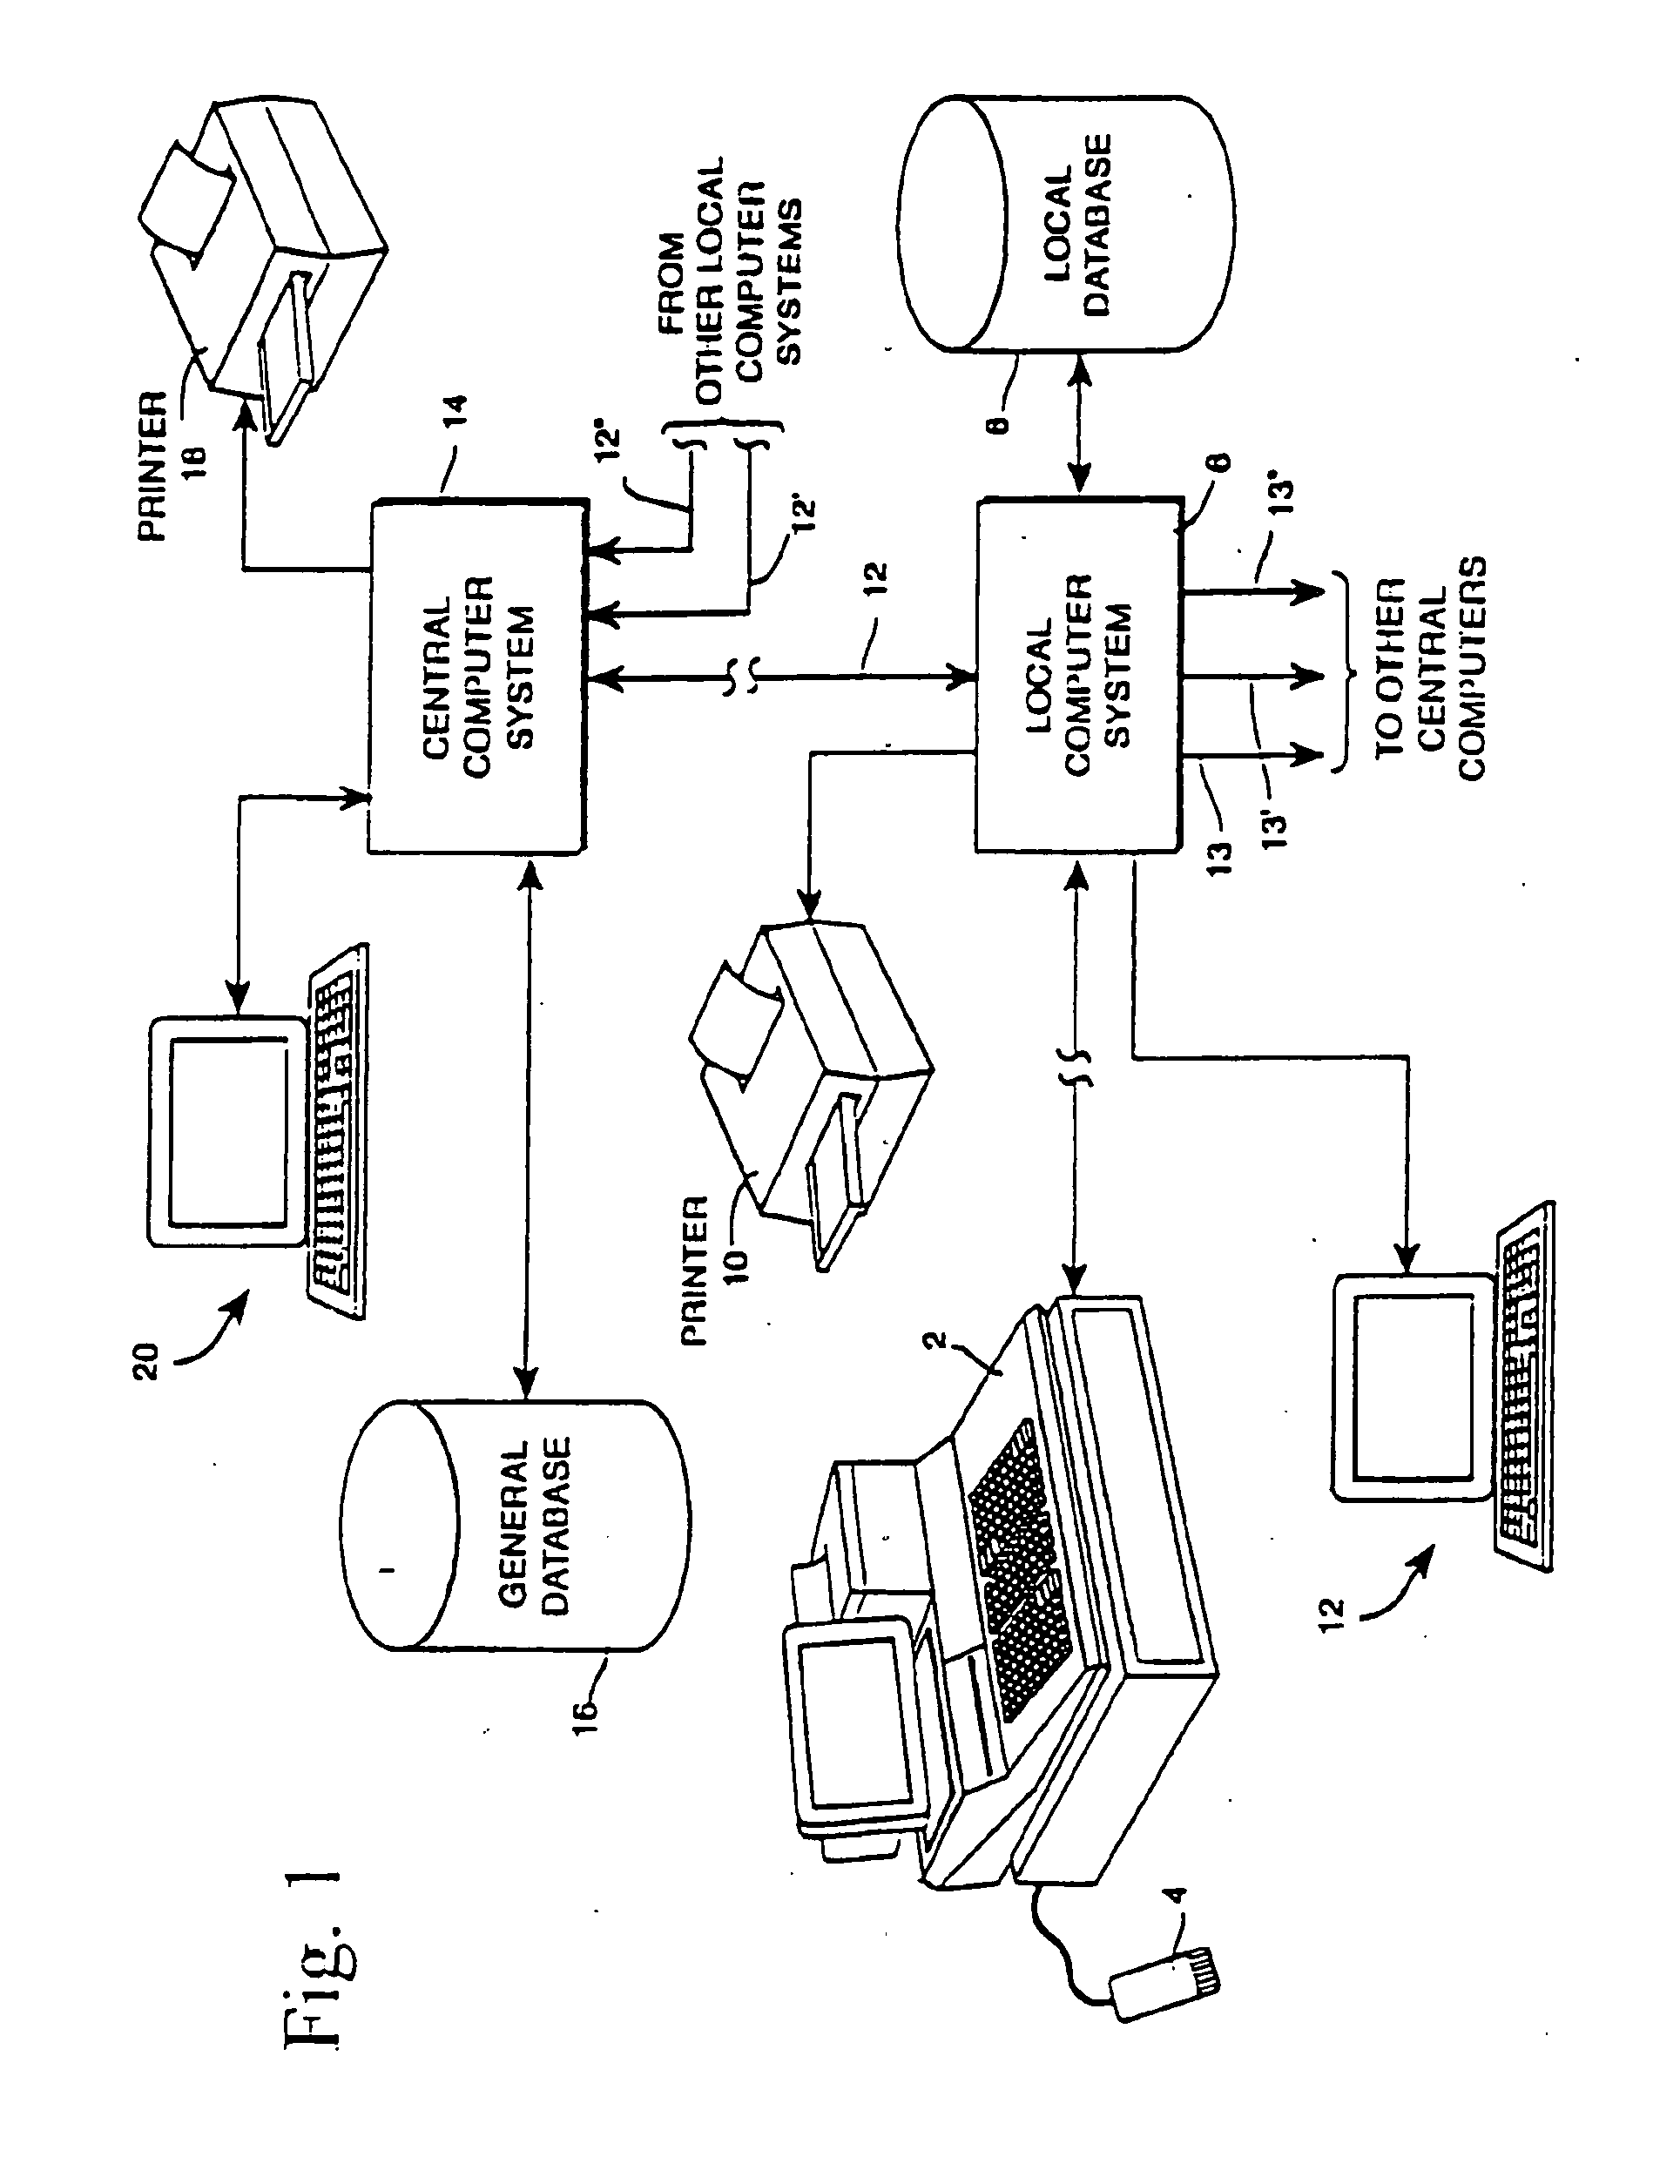 System and/or method for handling returns involving products tied to post-paid subscriptions/services